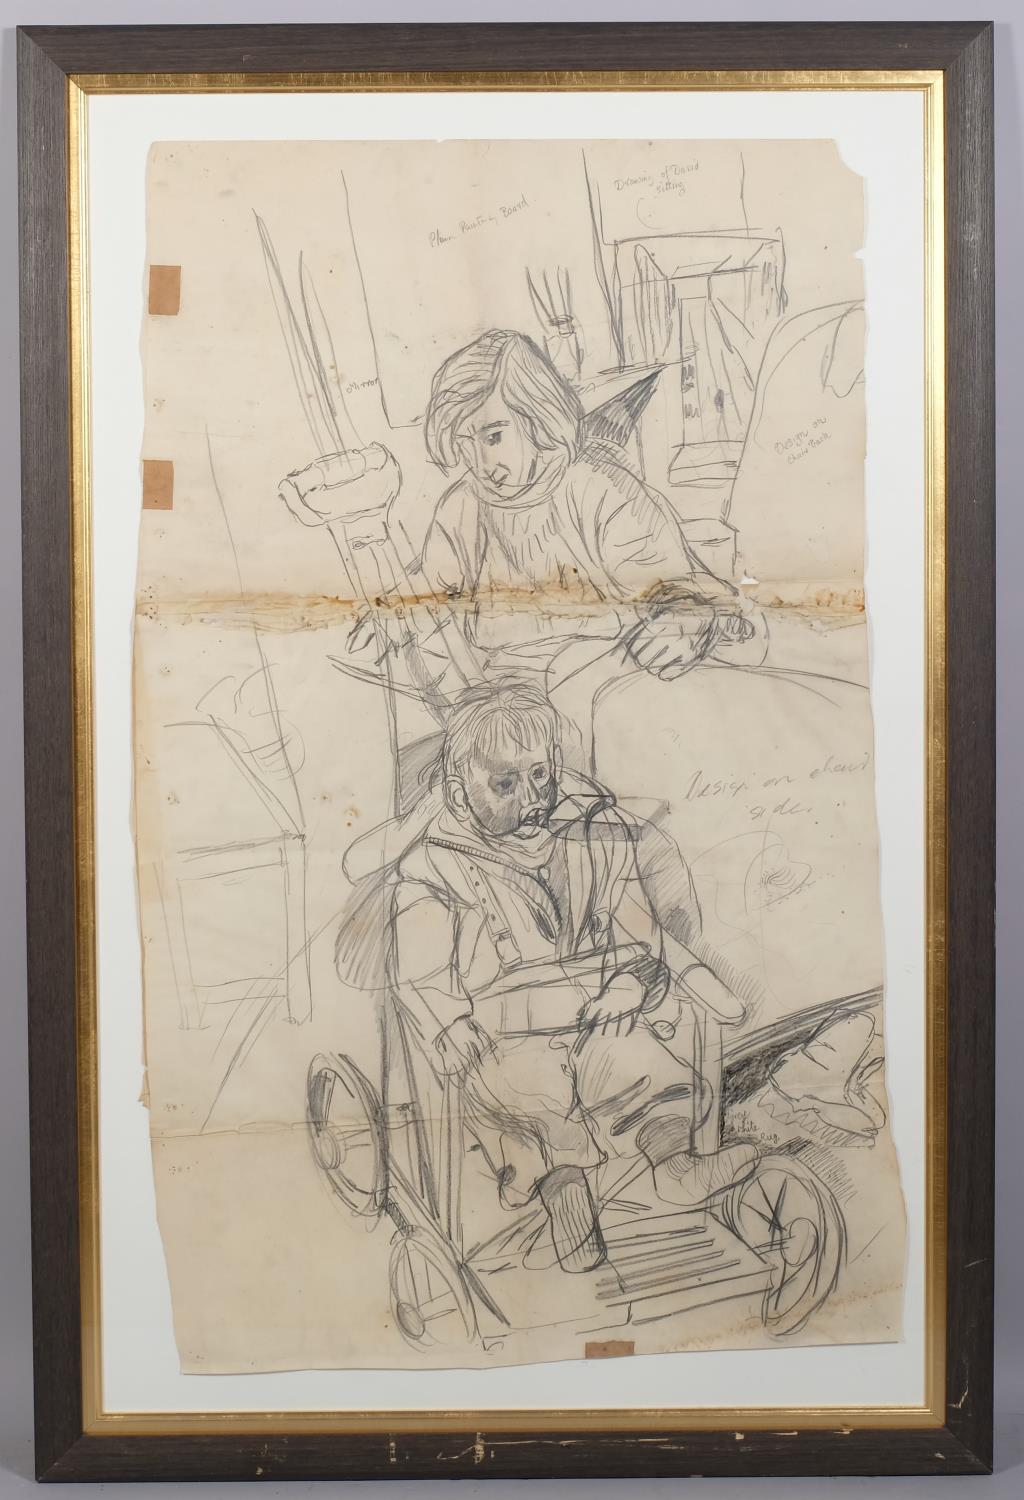 John Bratby RA (1928 - 1992), Jean and David, pencil sketch, sheet size 95cm x 57cm, framed 2 joined